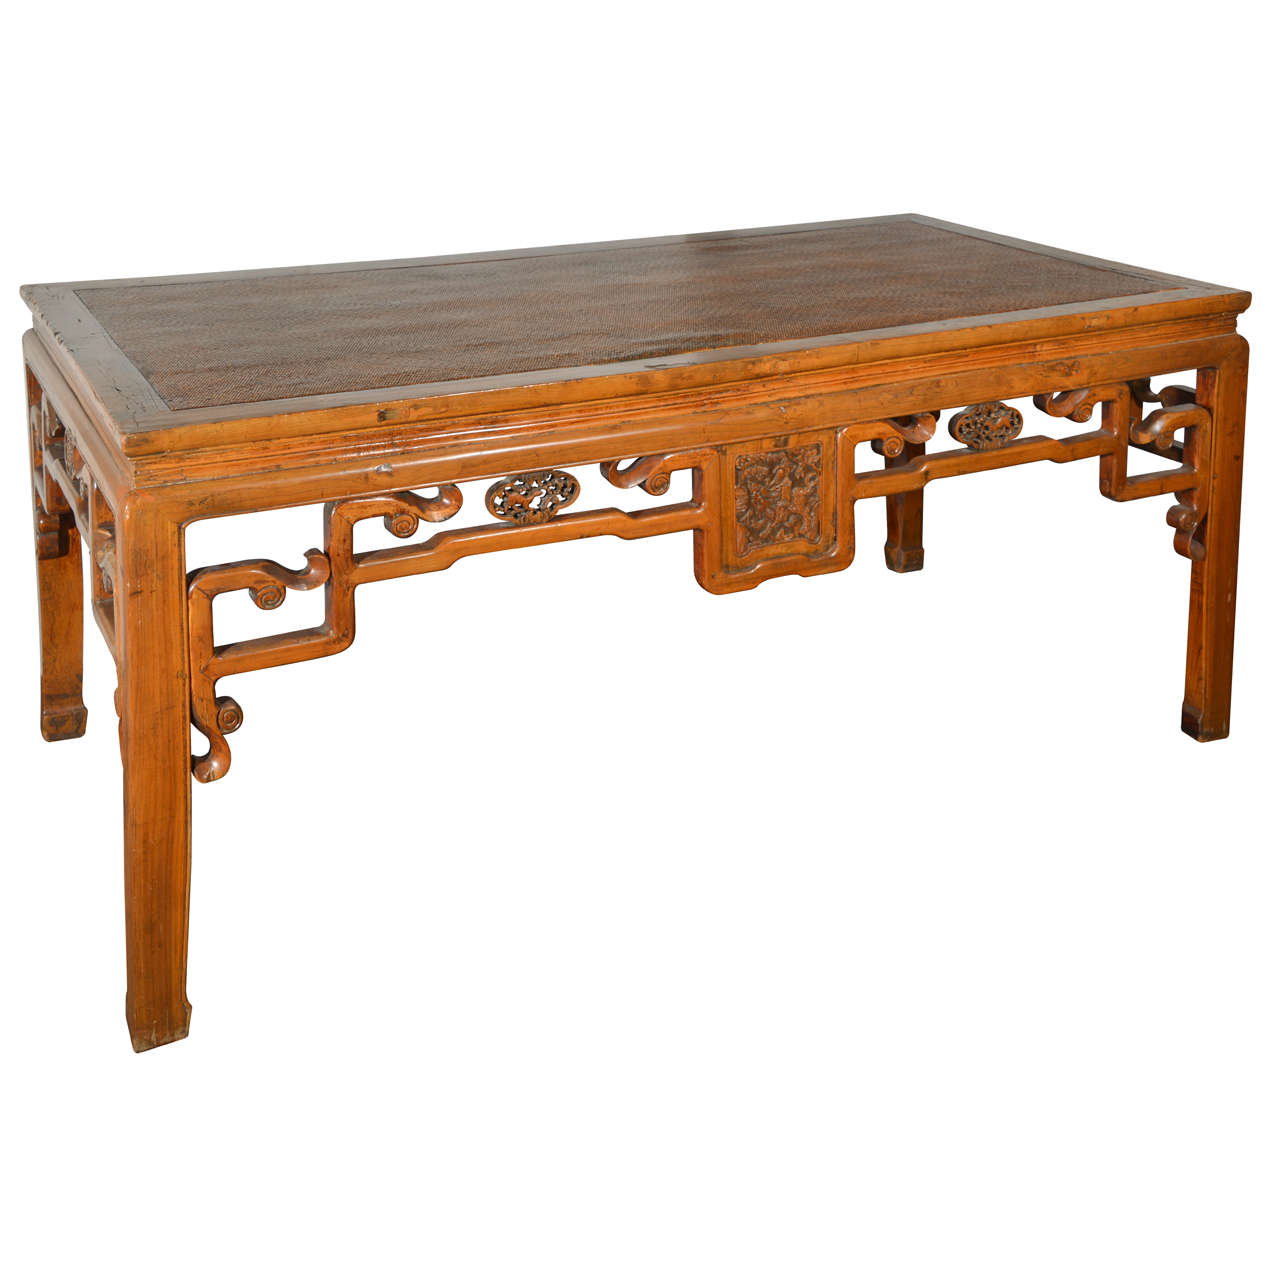 Chinese Carved Table, Qing Dynasty